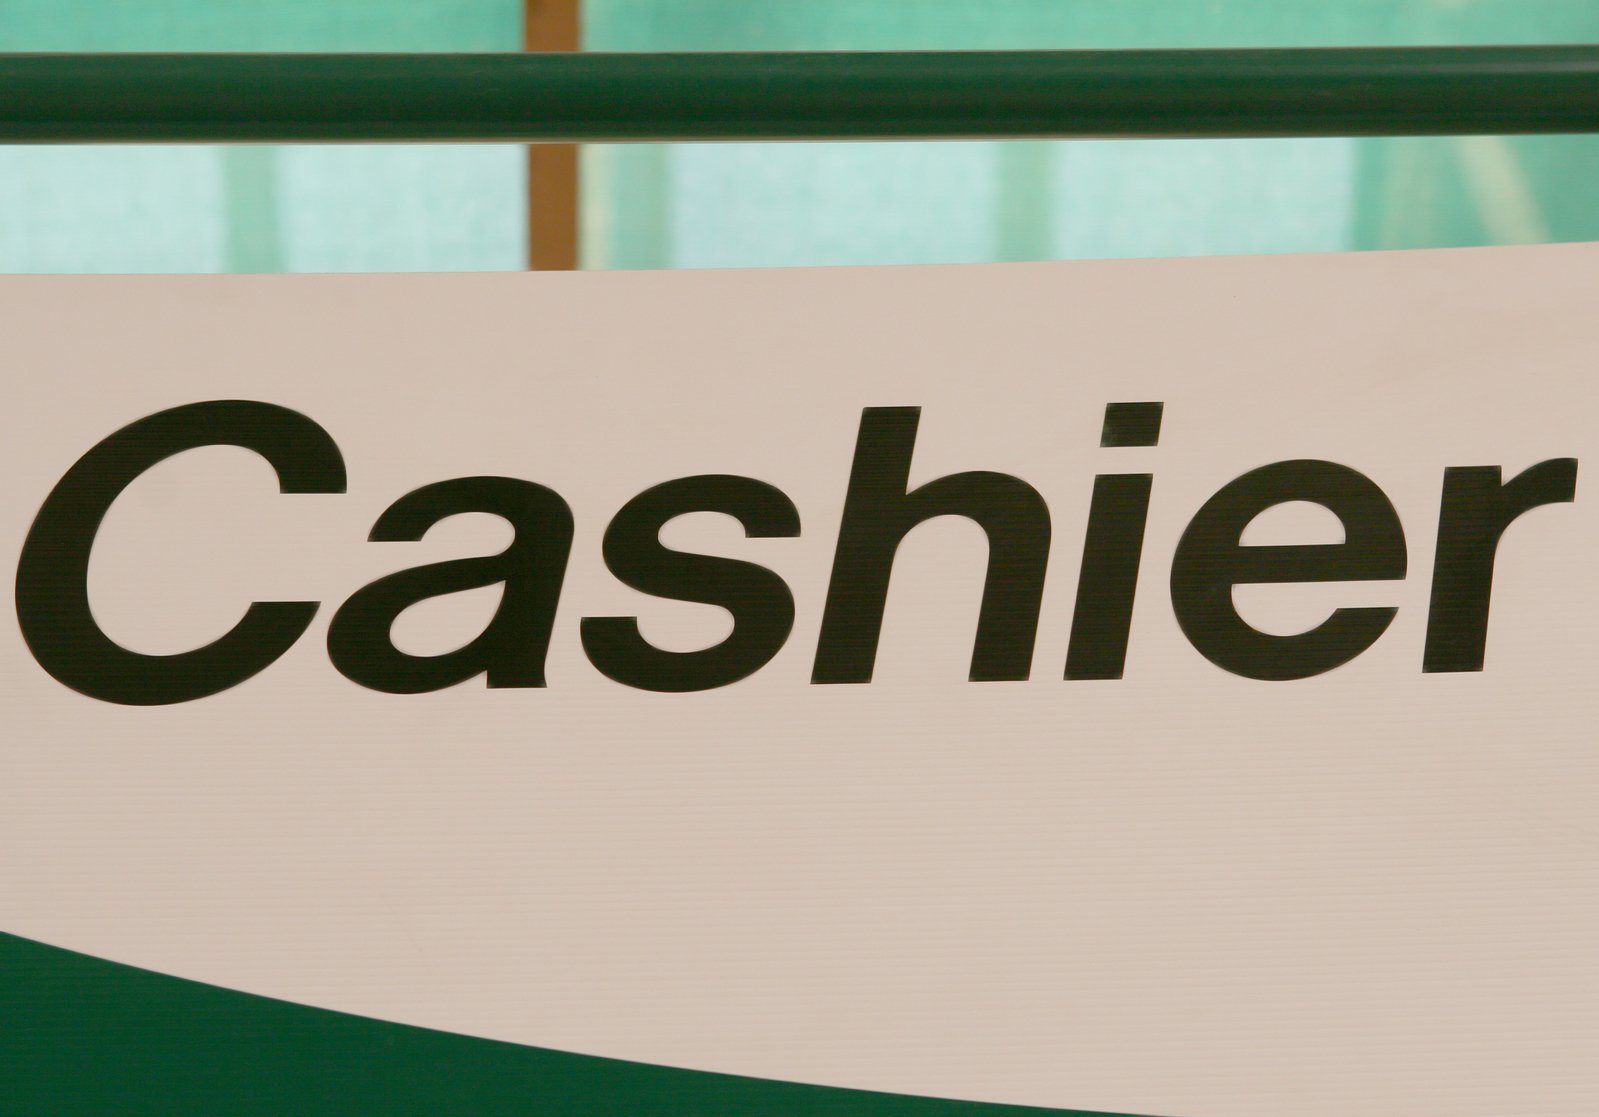 Cashier sign indoors, indicating location to pay